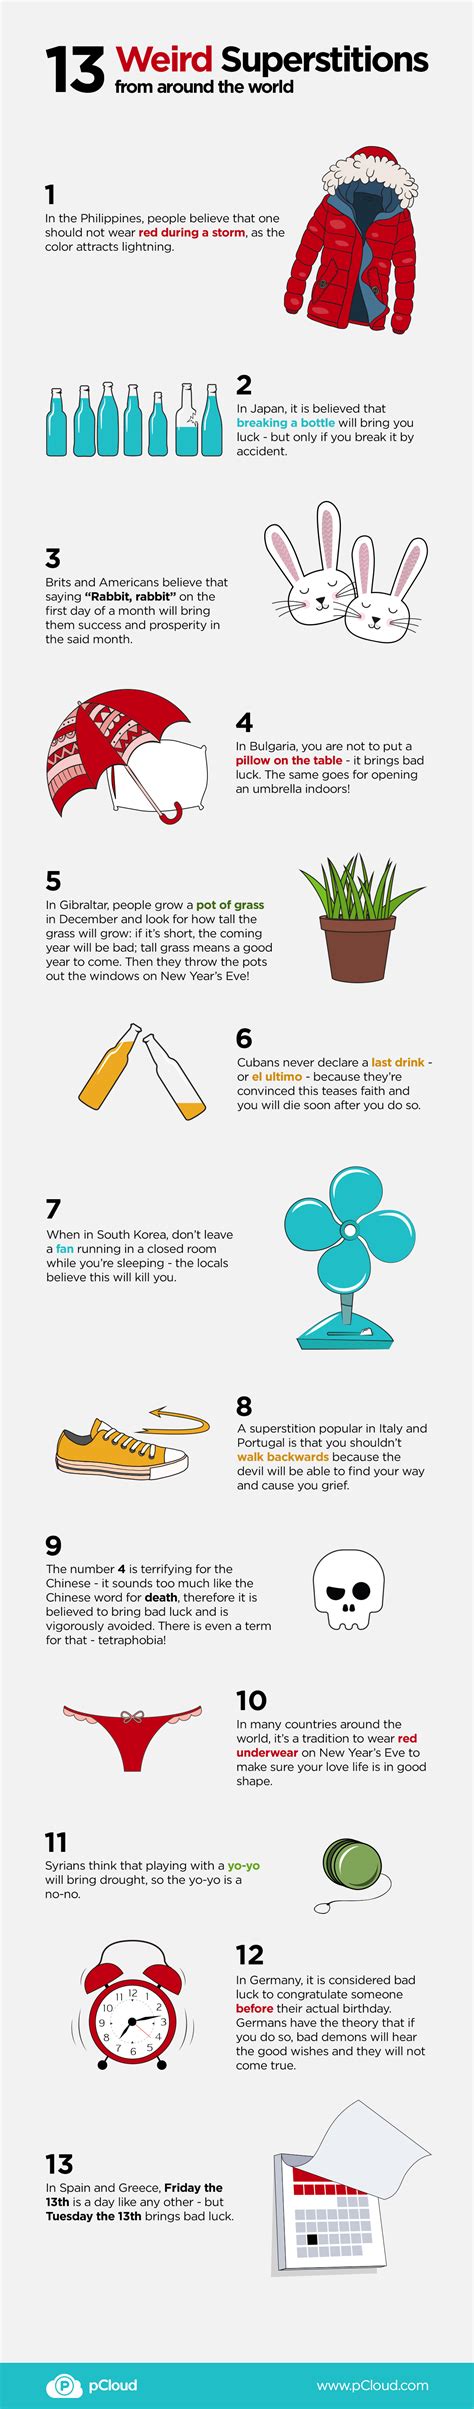 13 Weird Superstitions From Around The World Infographic Pcloud Blog